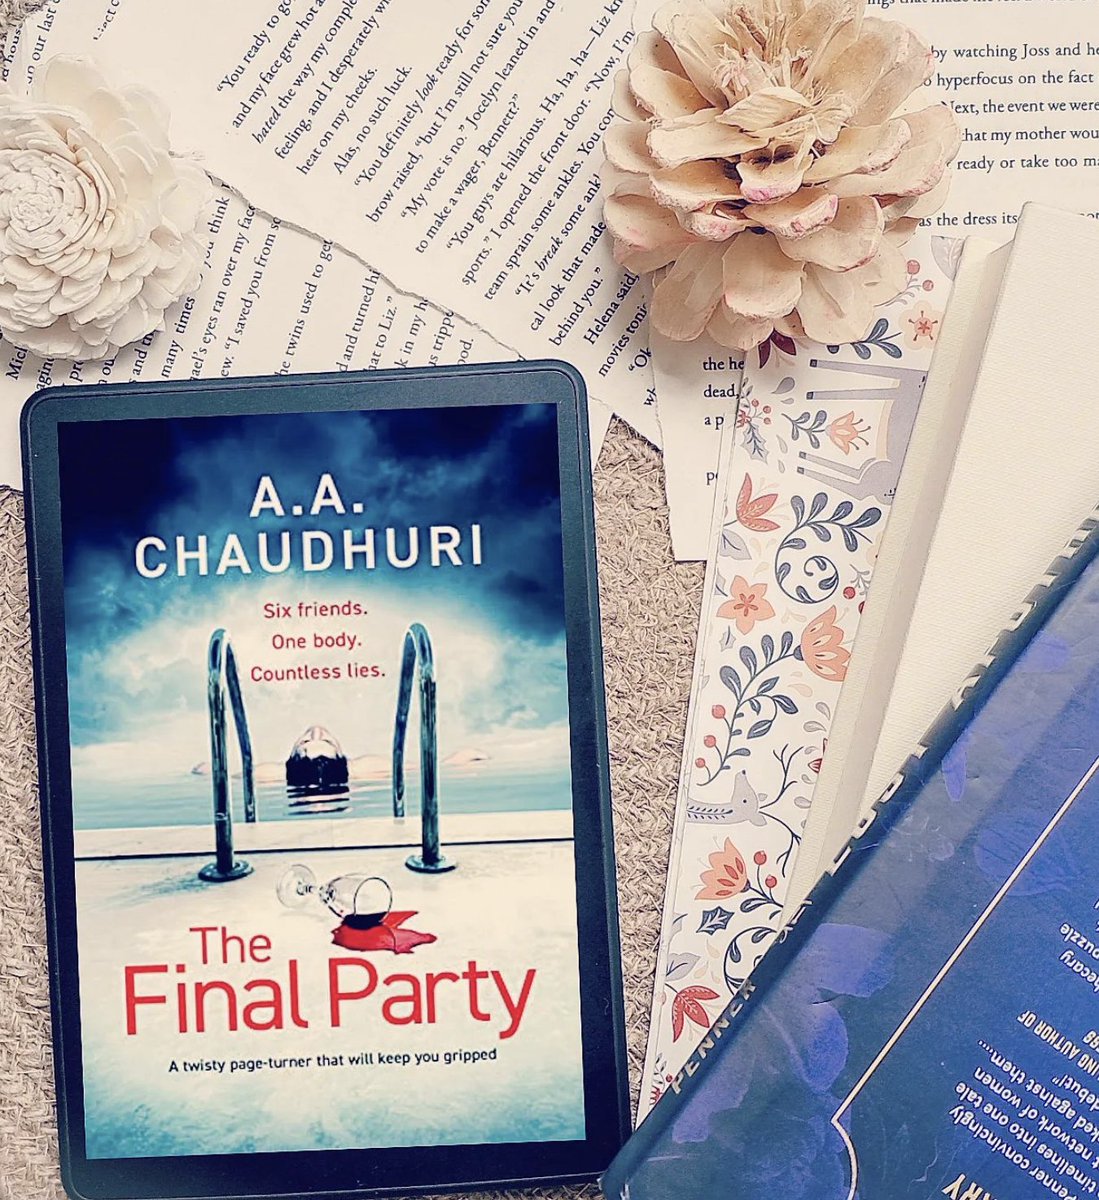 ⭐️⭐️⭐️⭐️
'This was a cleverly crafted thriller that had me guessing till the very end.' says @NishaCastelinoabout The Final Party by A. A. Chaudhuri @AAChaudhuri @HeraBooks 
instagram.com/p/CtY_cm2LB_k/
#virtualbooktour by @lovebookstours  #bookbloggers #bookreviews